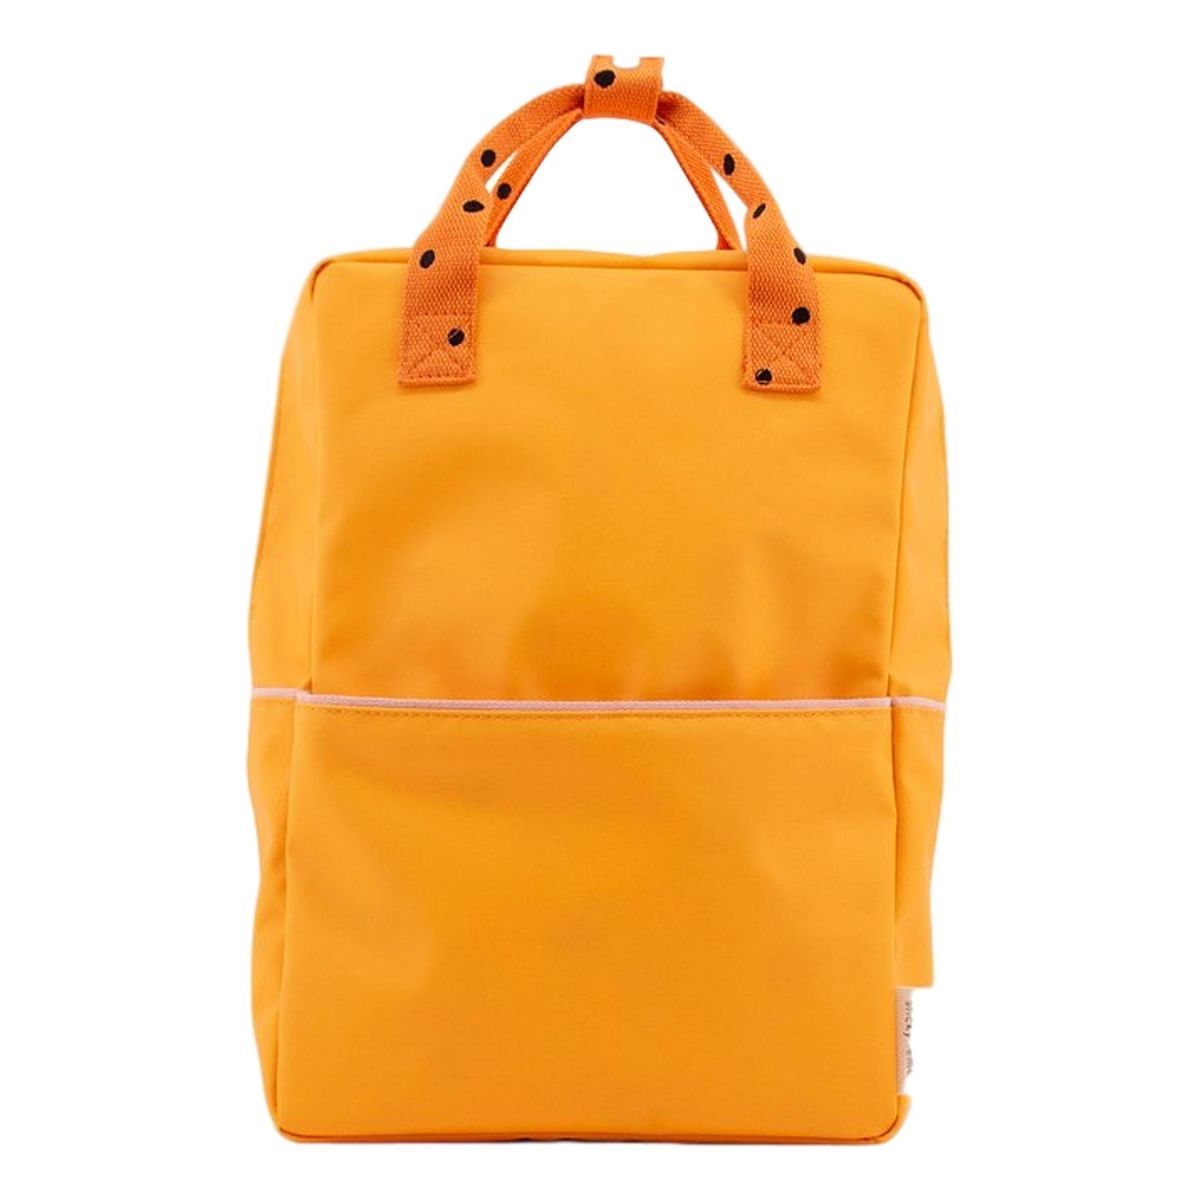 Sticky Lemon Backpack large / Freckles Sunny yellow 1801644